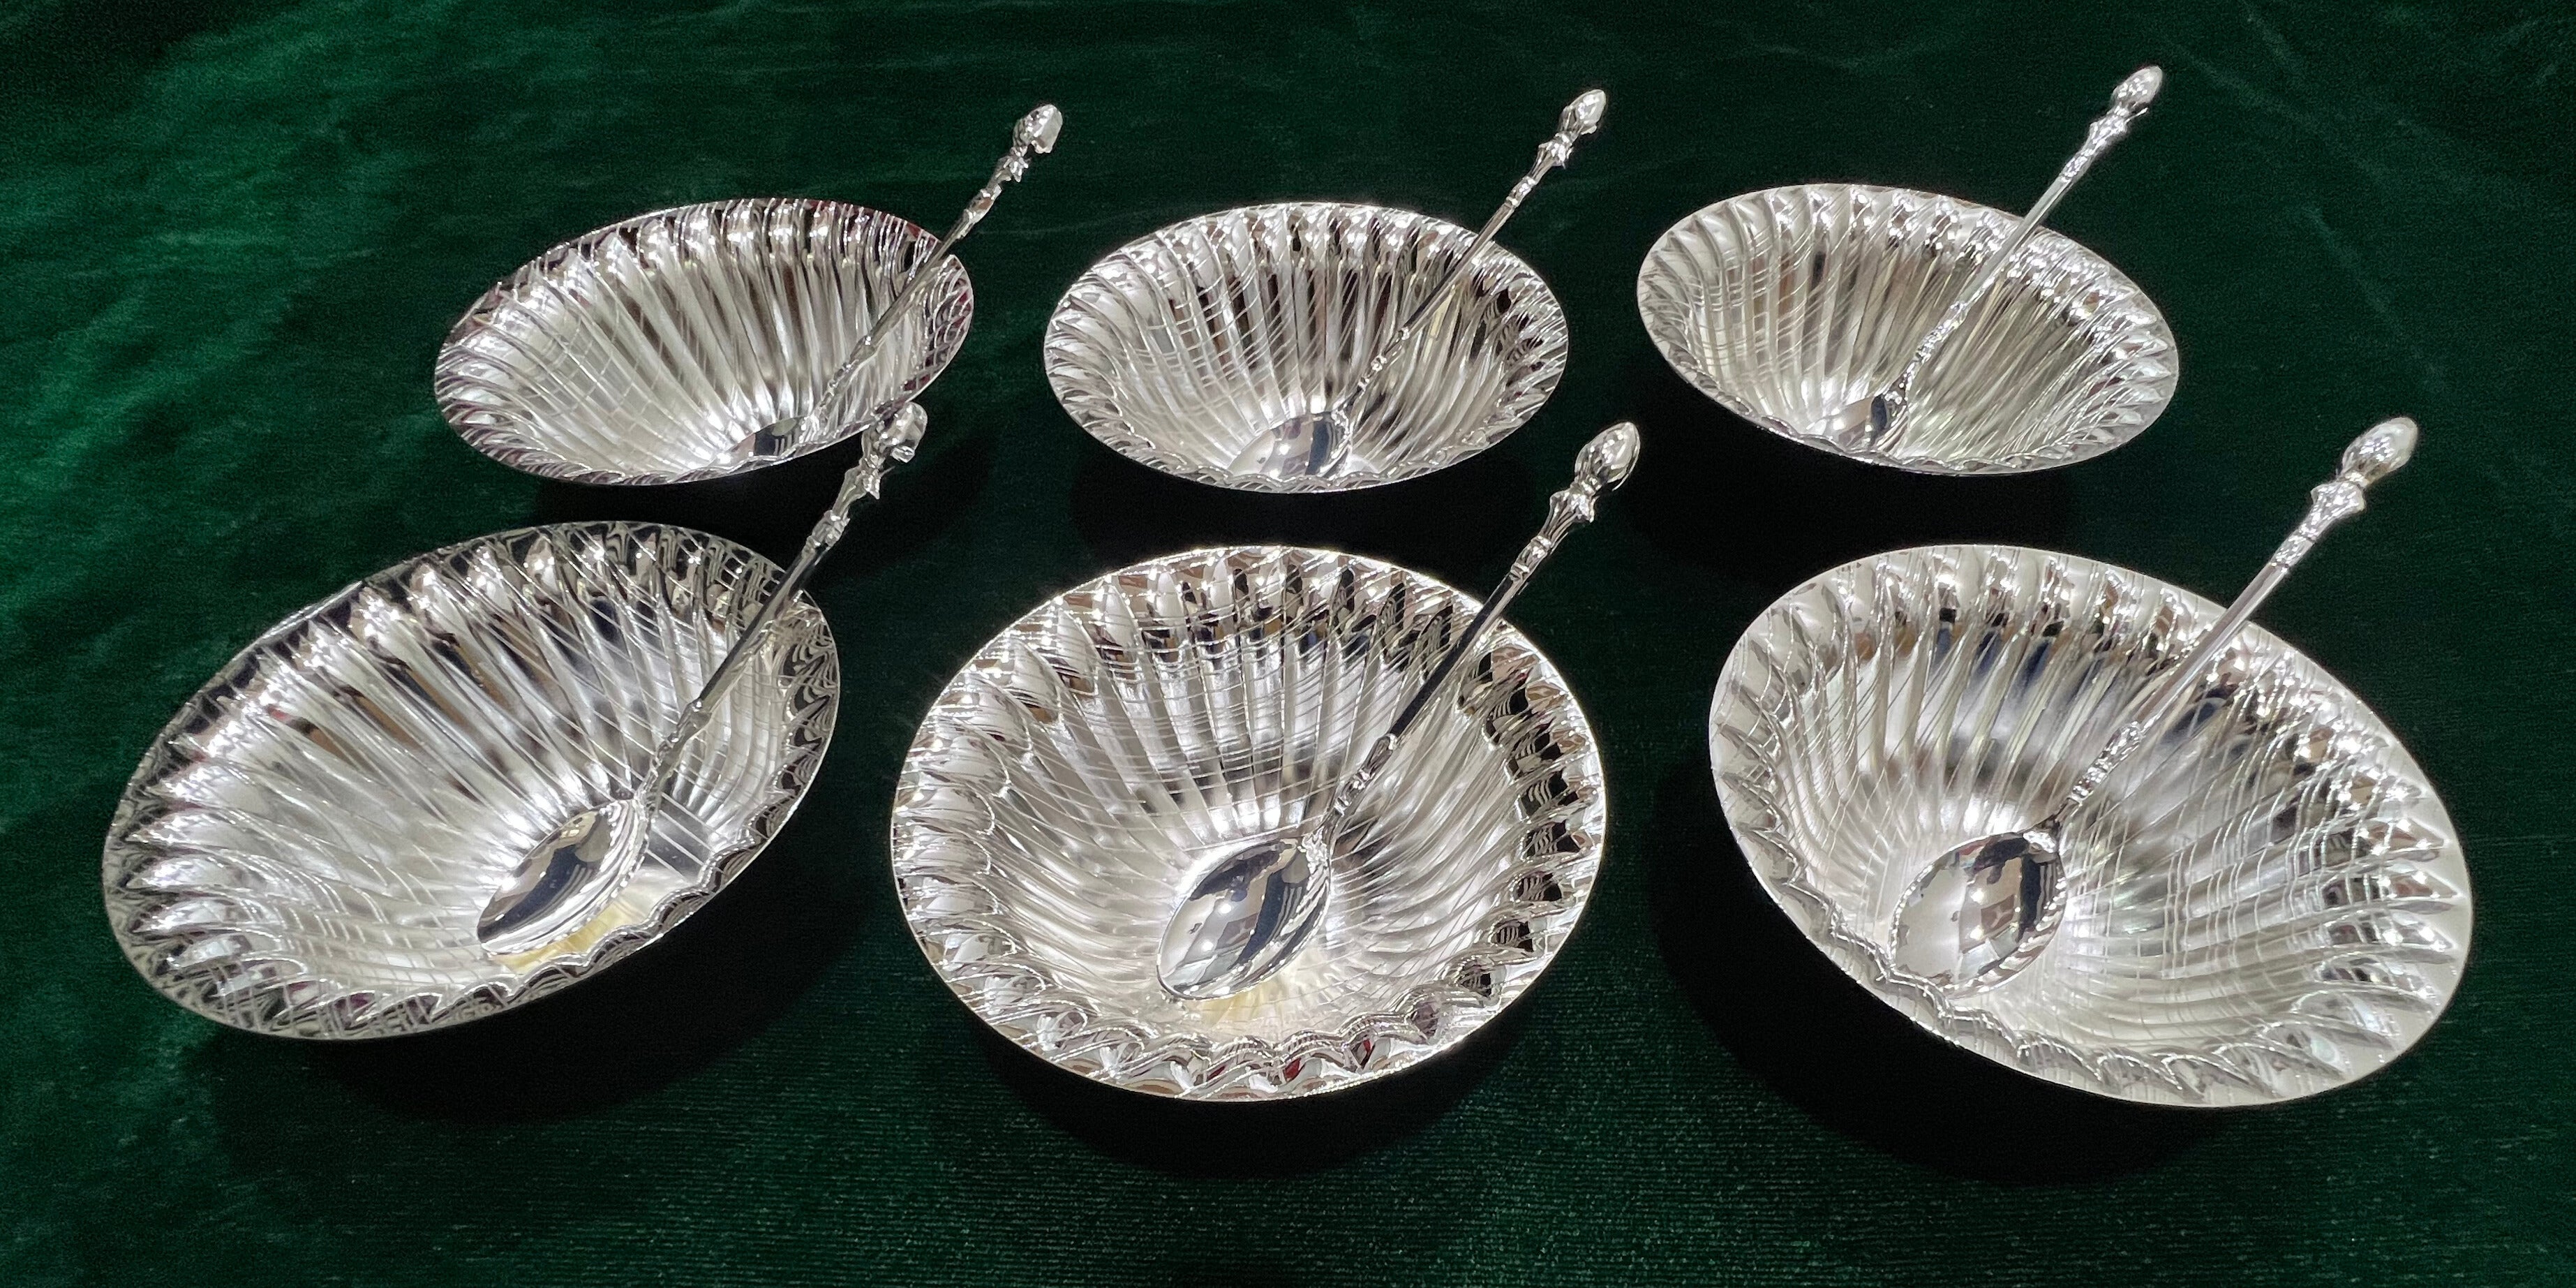 Silver Corporate Gifts - Set of 4 Bowls, Spoons and Tray - GD-102267 | Gift  Dezires